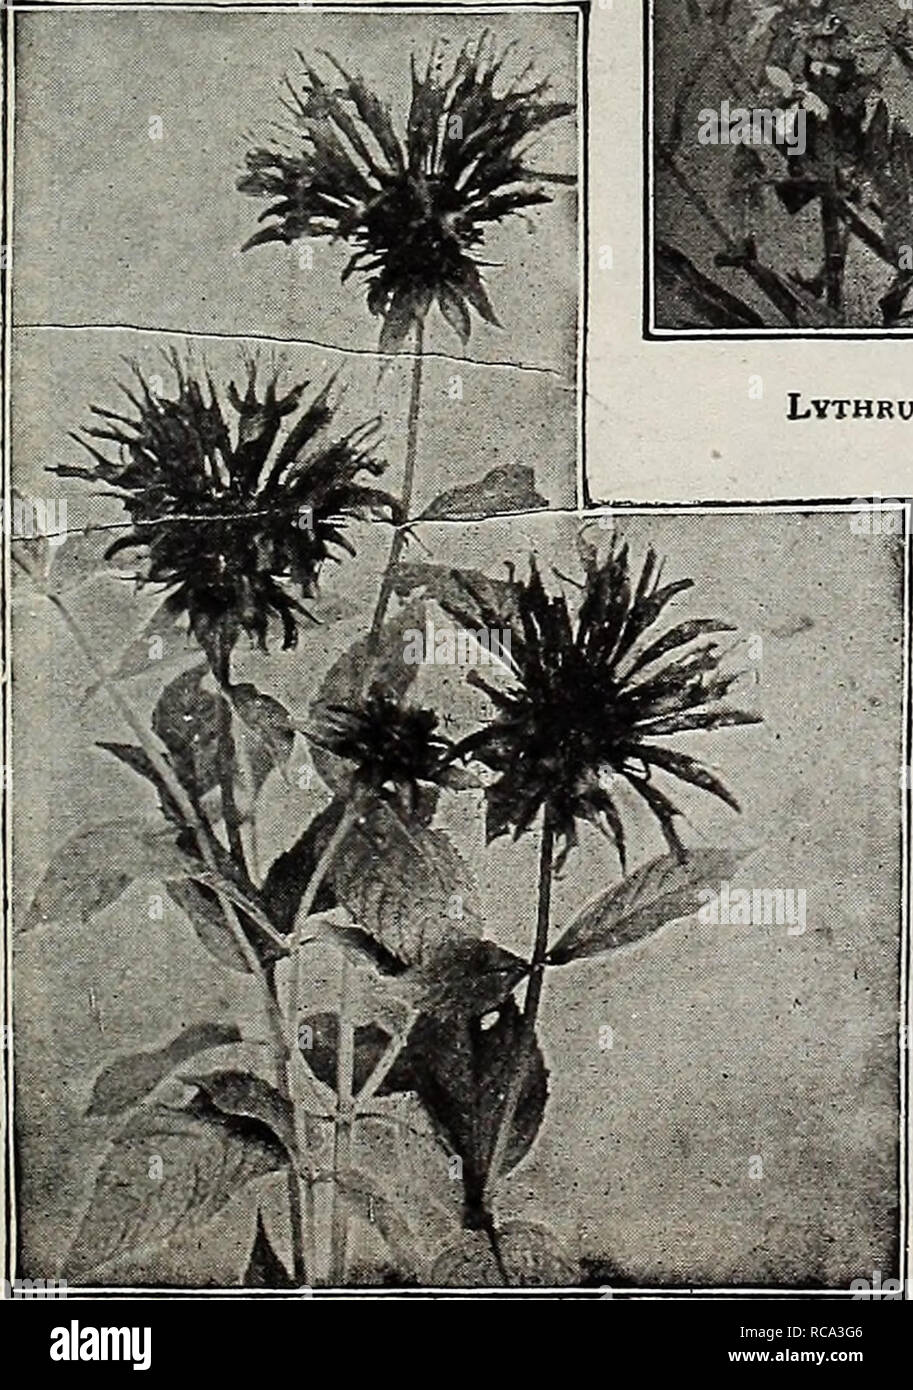 . Dreer's garden book 1919. Seeds Catalogs; Nursery stock Catalogs; Gardening Equipment and supplies Catalogs; Flowers Seeds Catalogs; Vegetables Seeds Catalogs; Fruit Seeds Catalogs. !HEHRTADRRRJ^HIlADELPHIAfA-^HARDY PEREhhlAL Mm 189 L,YSIMACHIA Ciliata (Fringed Loose-strife). Yellow flowers in July. 2 feet. Clethroides {Loose-strife). A fine hardy variety about 2 feet high, with long, dense, recurved spikes of pure white flowers from July to September. Fortunei. A neat variety, growing about 18 inches high, with dense, upright spikes of white flowers in August. Nummularia {Creeping Jenny, or Stock Photo